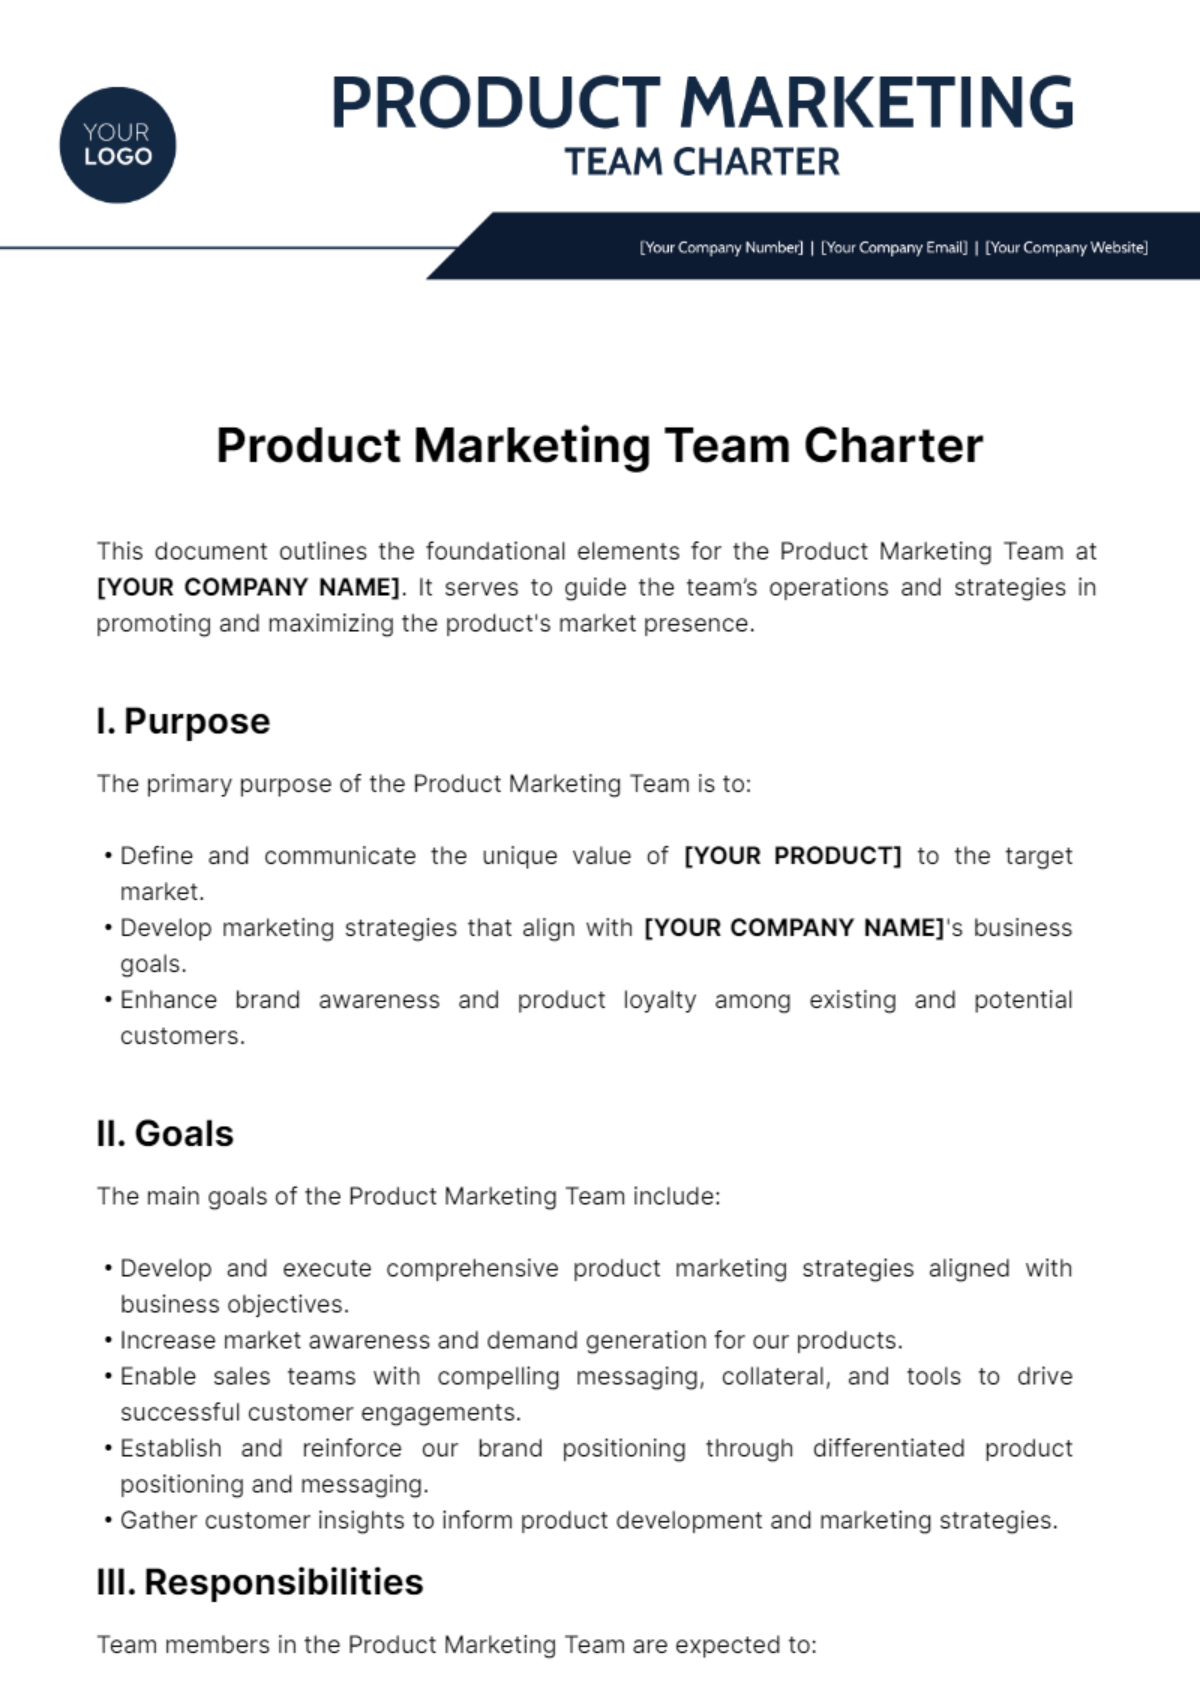 Product Marketing Team Charter Template